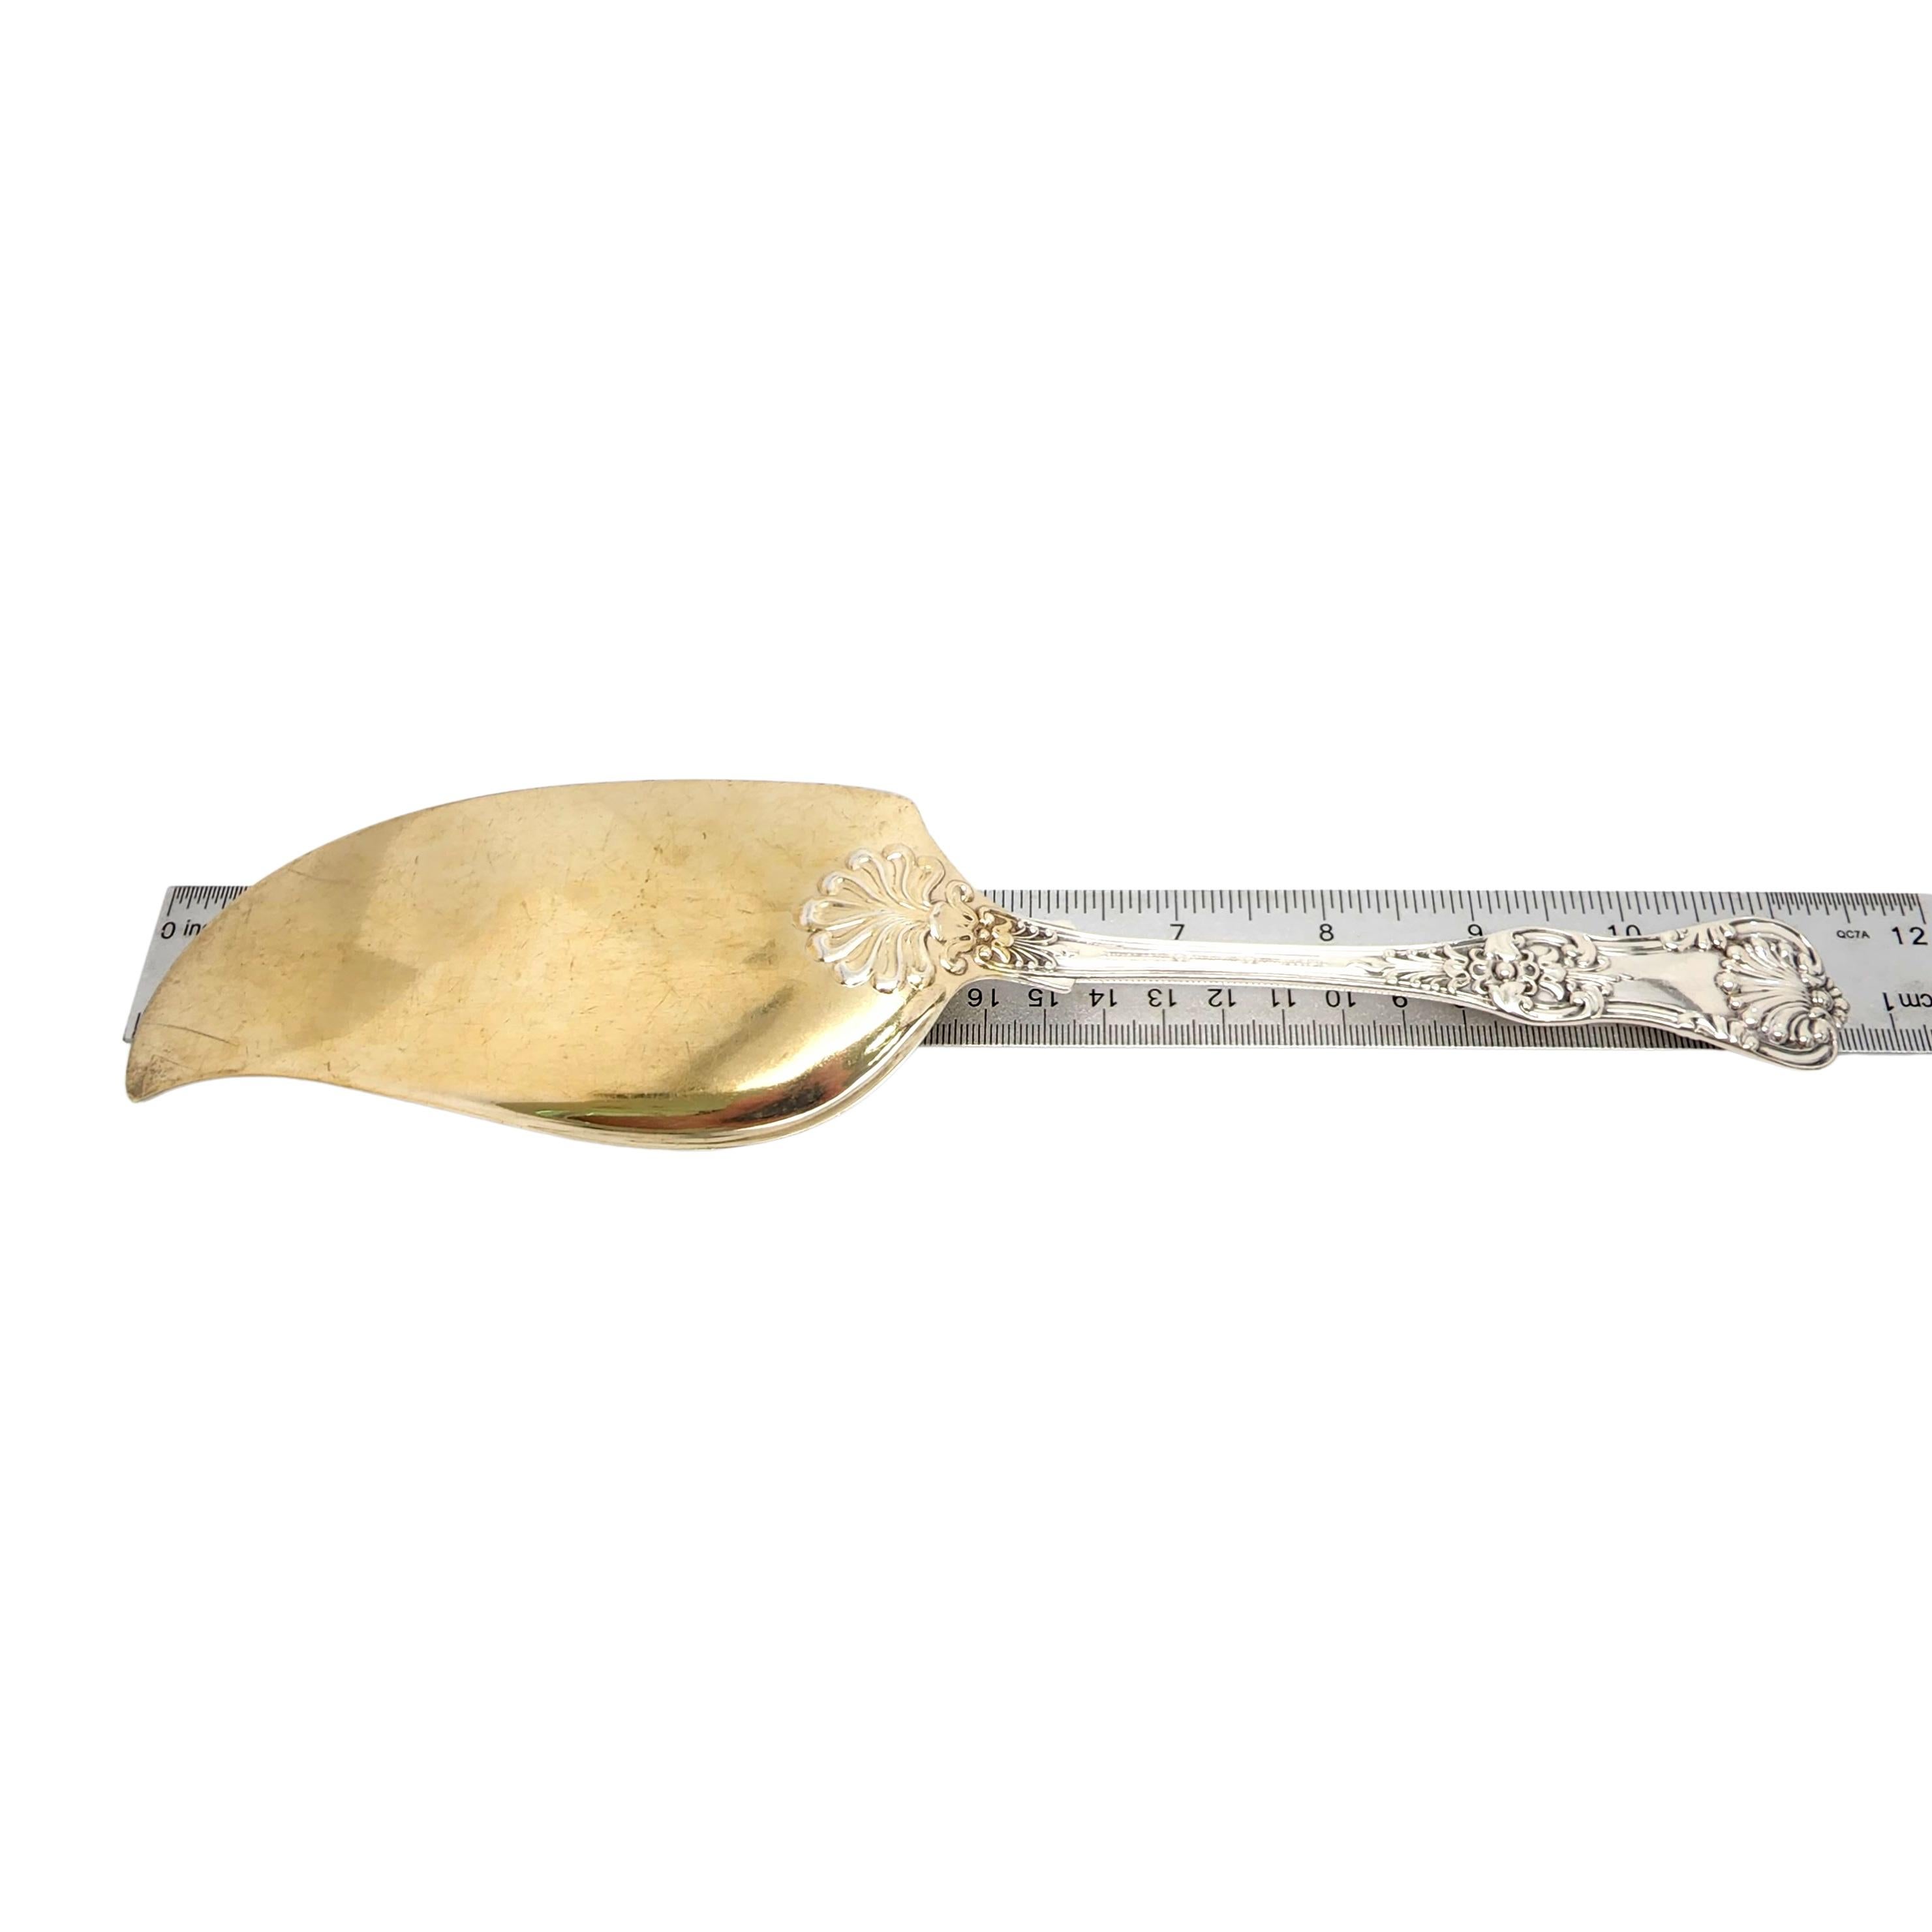 Large antique sterling silver gold wash blade ice cream server by Tiffany & Co in the English King pattern.

Monogram appears to be R

Beautiful large and substantial ice cream server in Tiffany's intricate and decorative version of a King pattern,